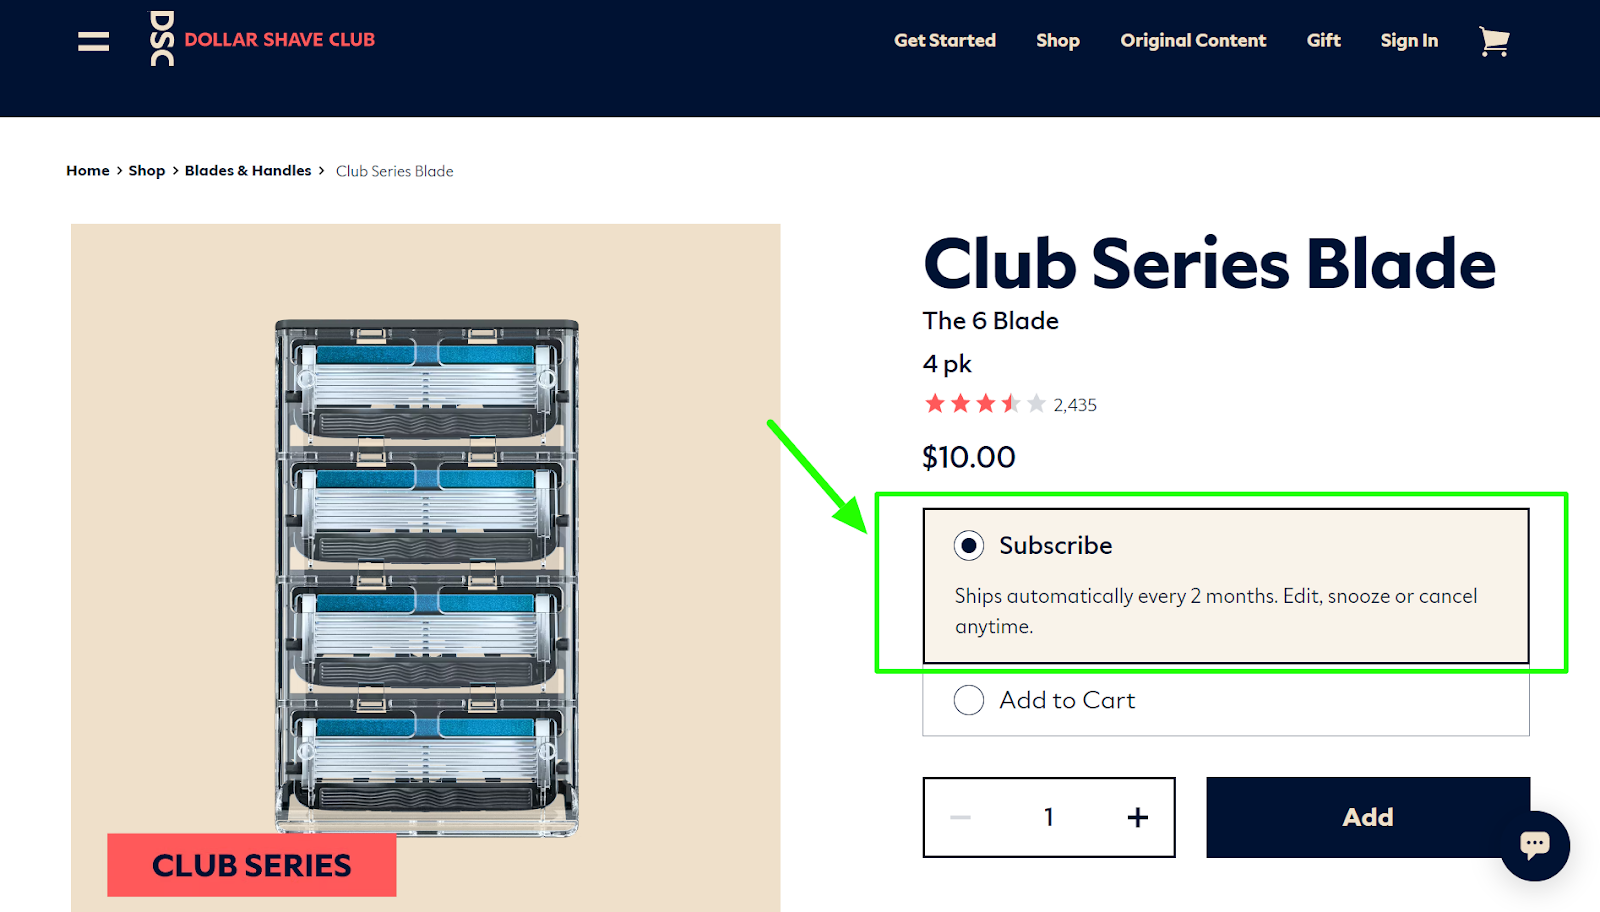 Example of subscription option added as an option to a product landing page.